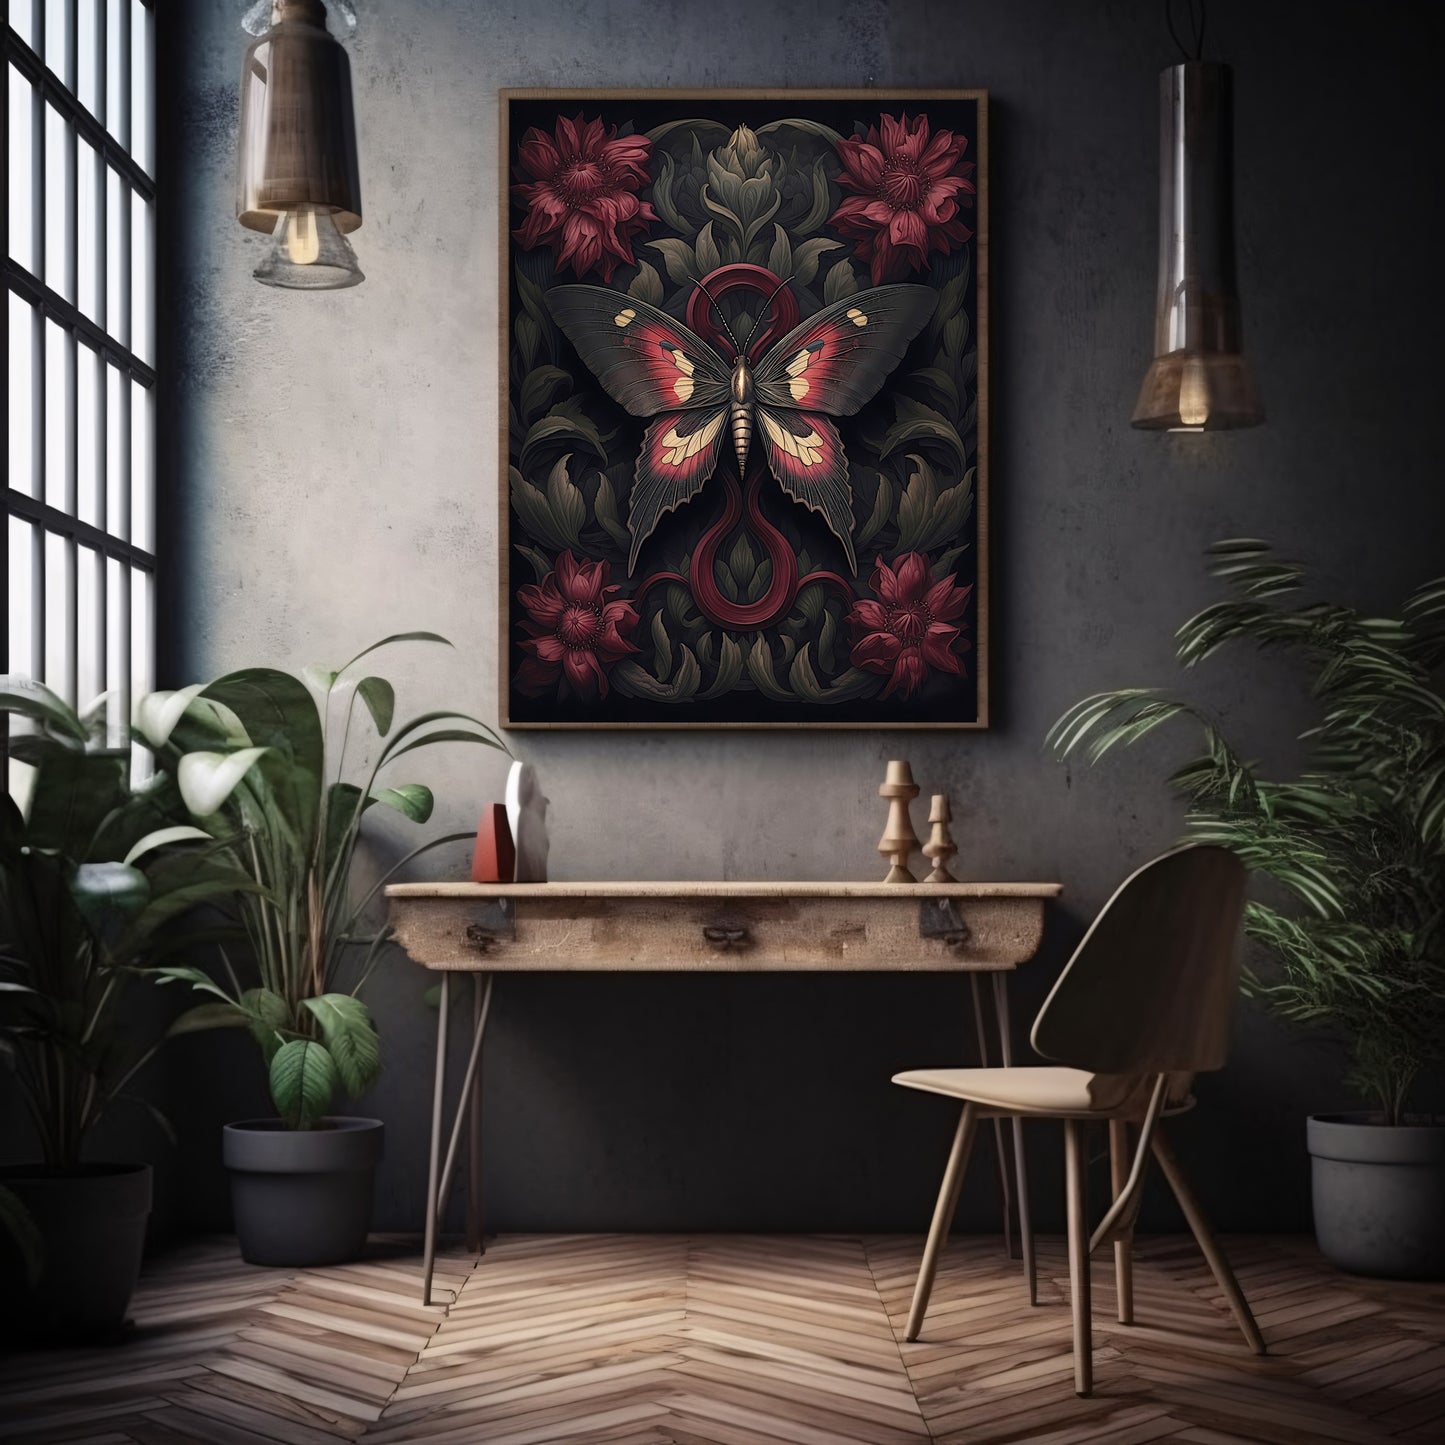 Botanical Moth Paper Poster Prints Dark Cottagecore Wall Art Witchy Gothic Botanical Decor Dark Academia Goblincore Goth Home Decor Moody Painting